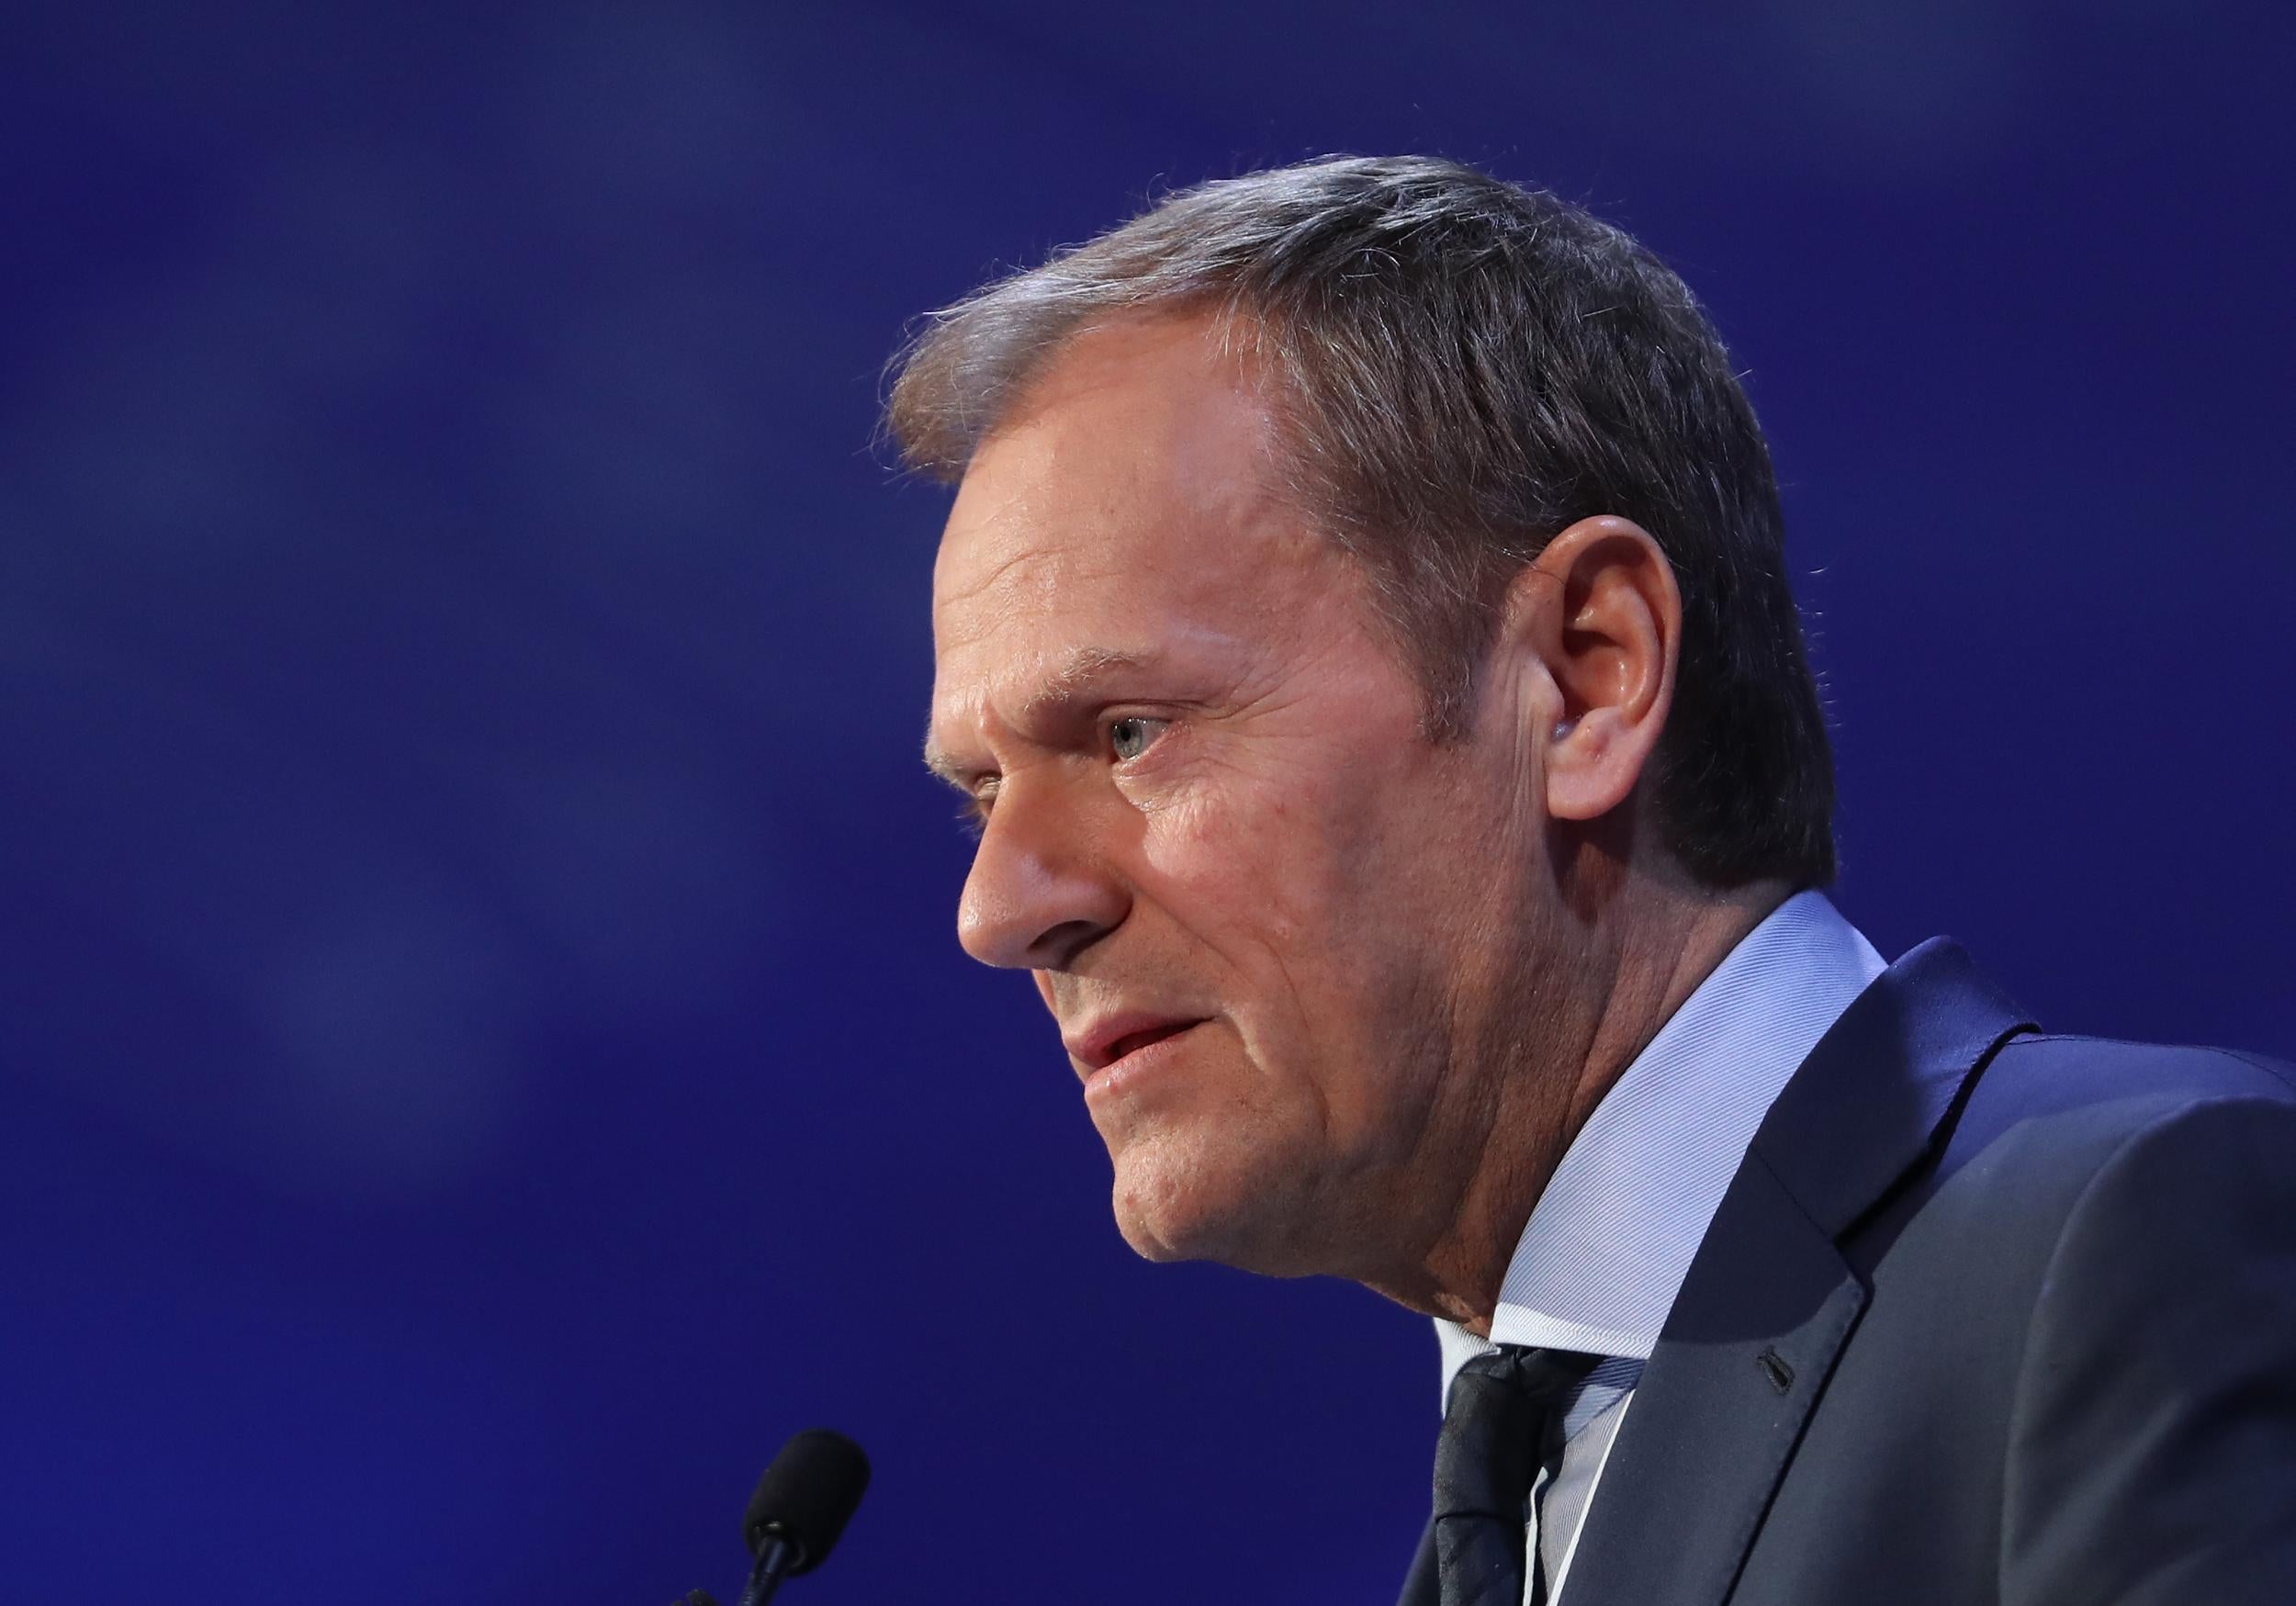 European Council President Donald Tusk said he was sure ‘it must be a misunderstanding’